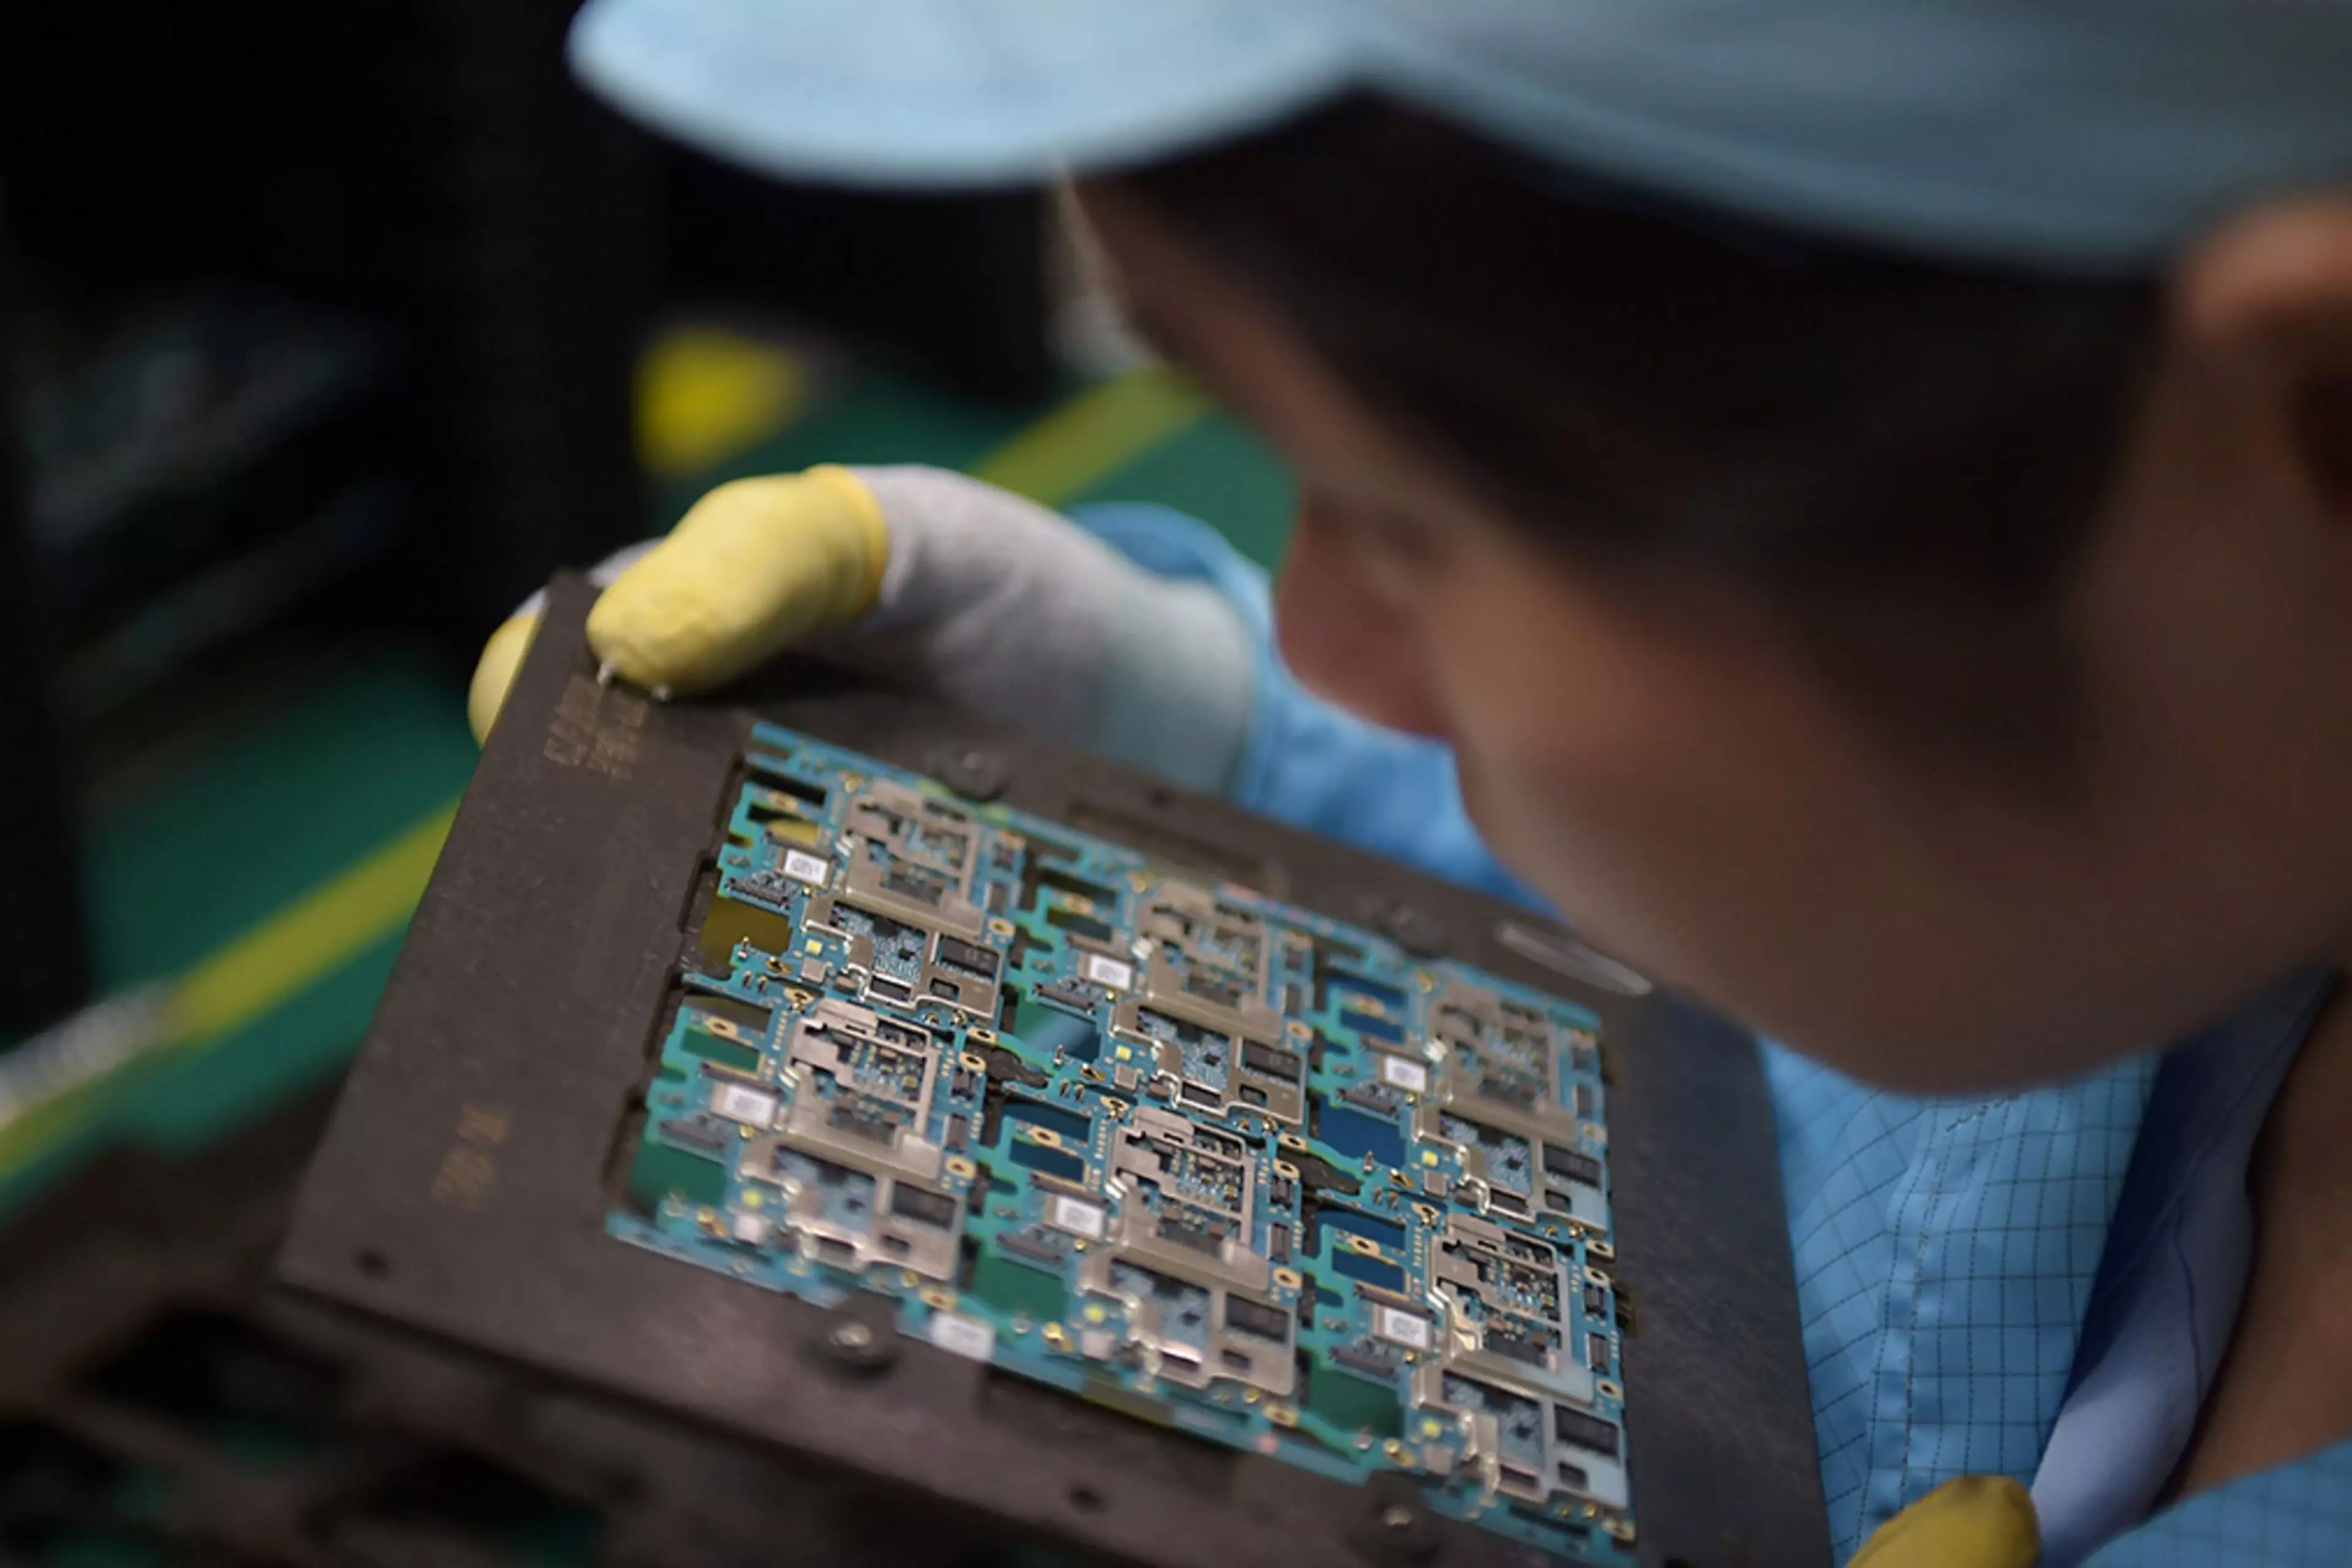 A worker handles smartphone chip components at a factory in Dongguan, China.